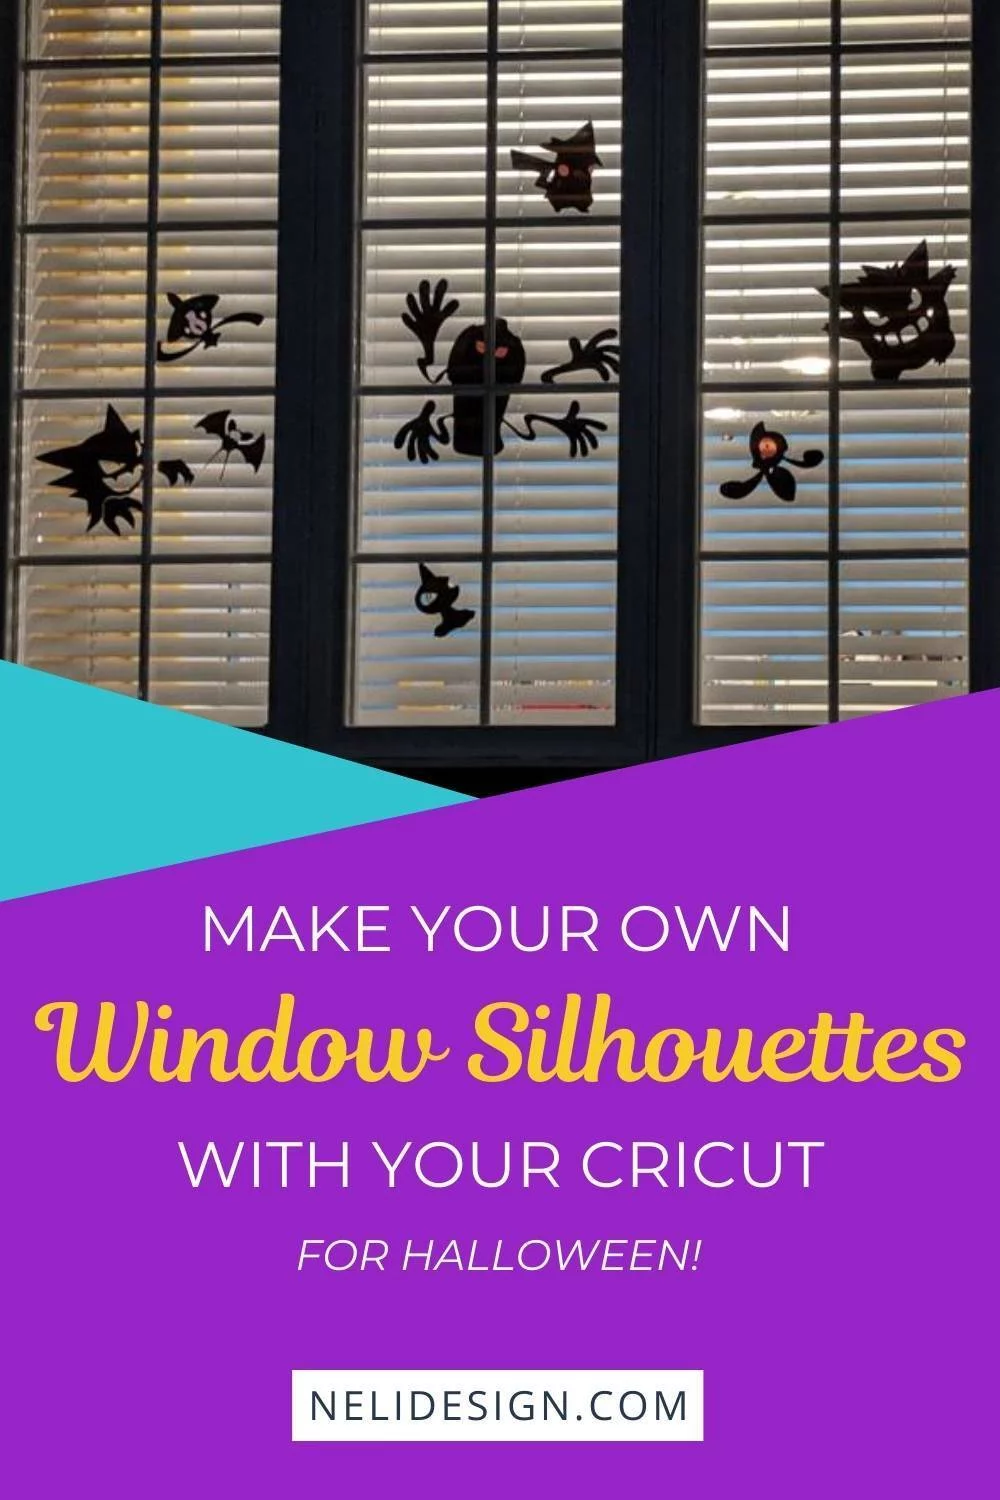 Make your own window silhouettes with your Cricut